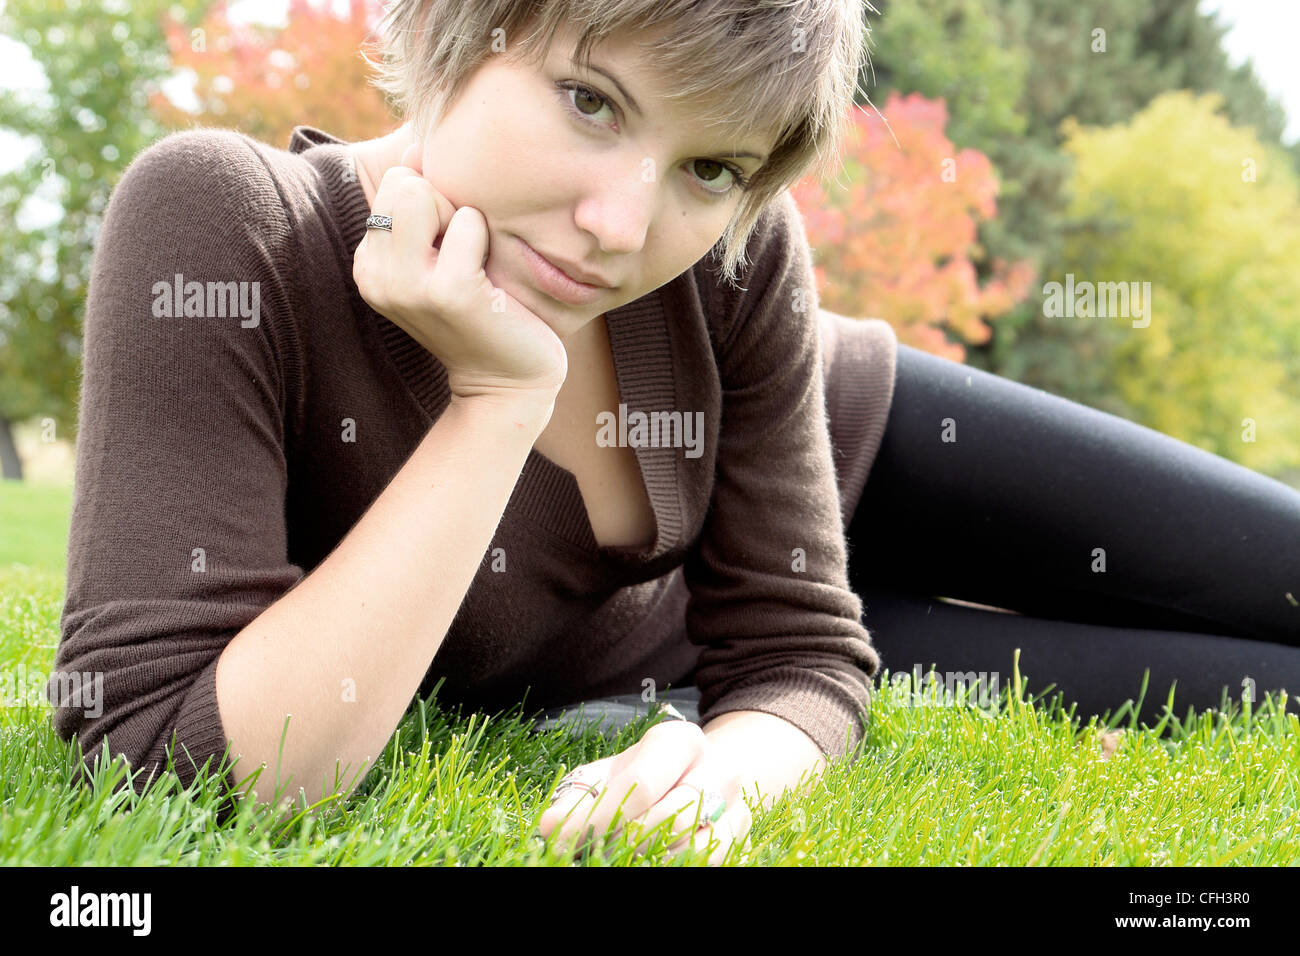 Portrait of a Young Woman Lying in Grass Banque D'Images